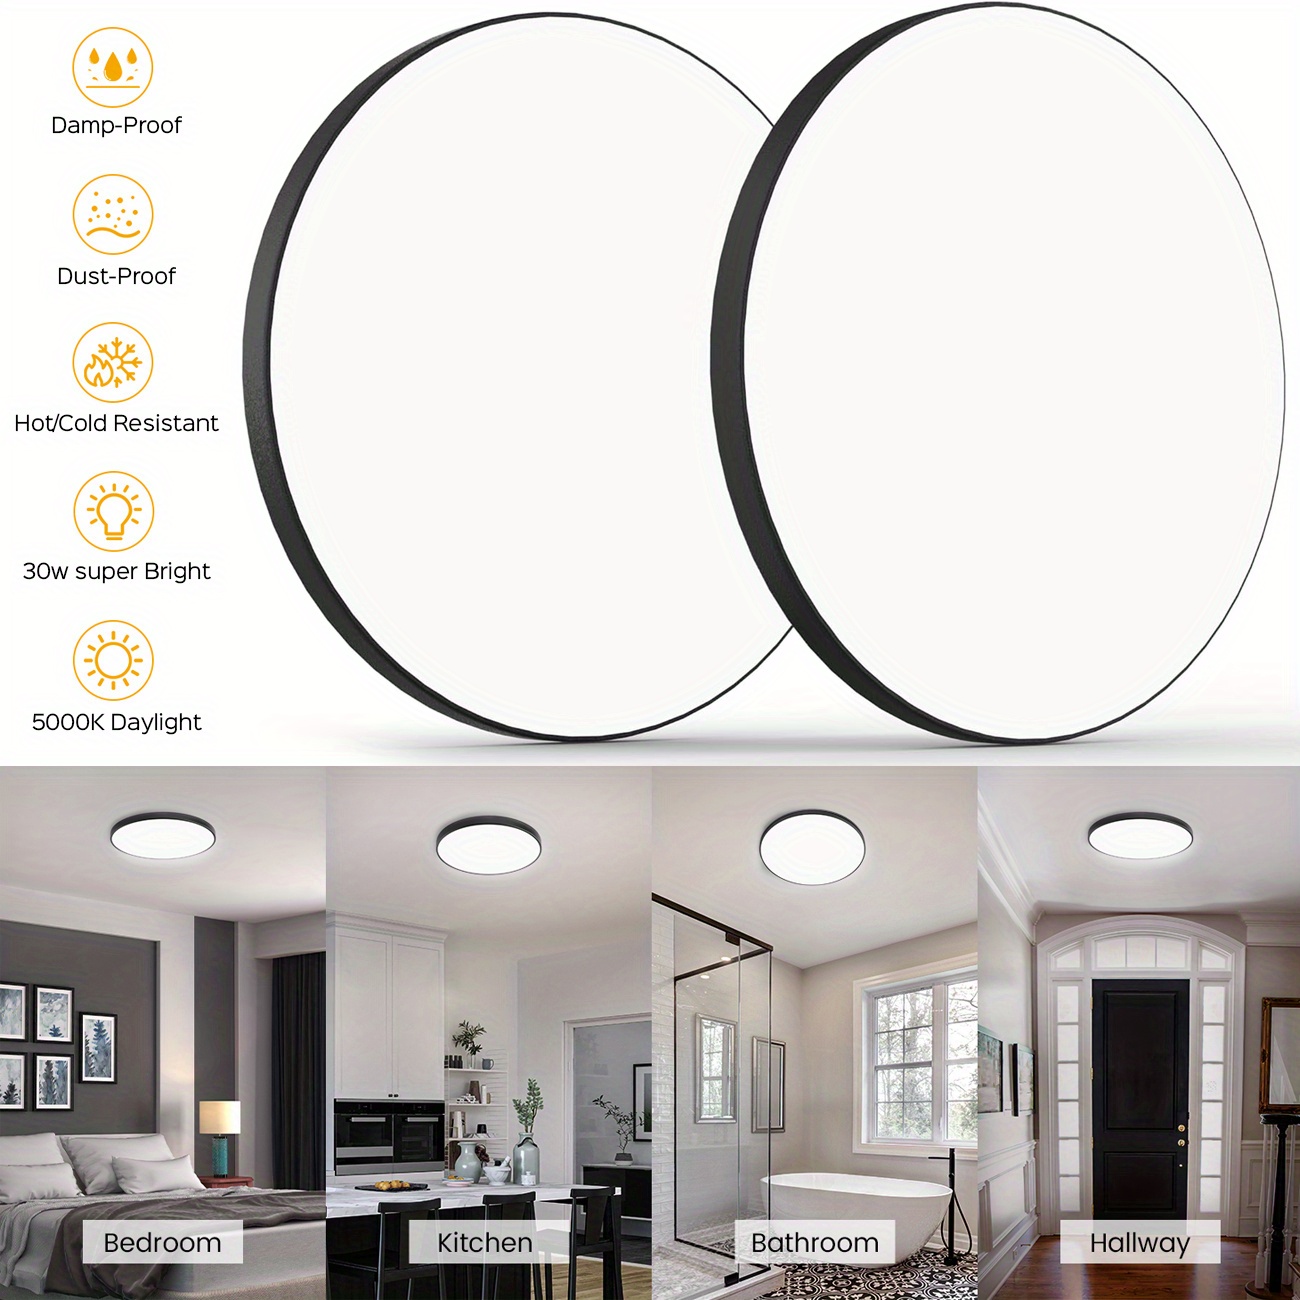 

2 Pack Superdanny12in Round Flush Mount Ceiling Lamp, 3000lm 5000k Daylight White, Cri 90+, Super Bright Flat Led Ceiling Fixture, Modern Panel Lamp For Bathroom, Kitchen, Bedroom, Hallway